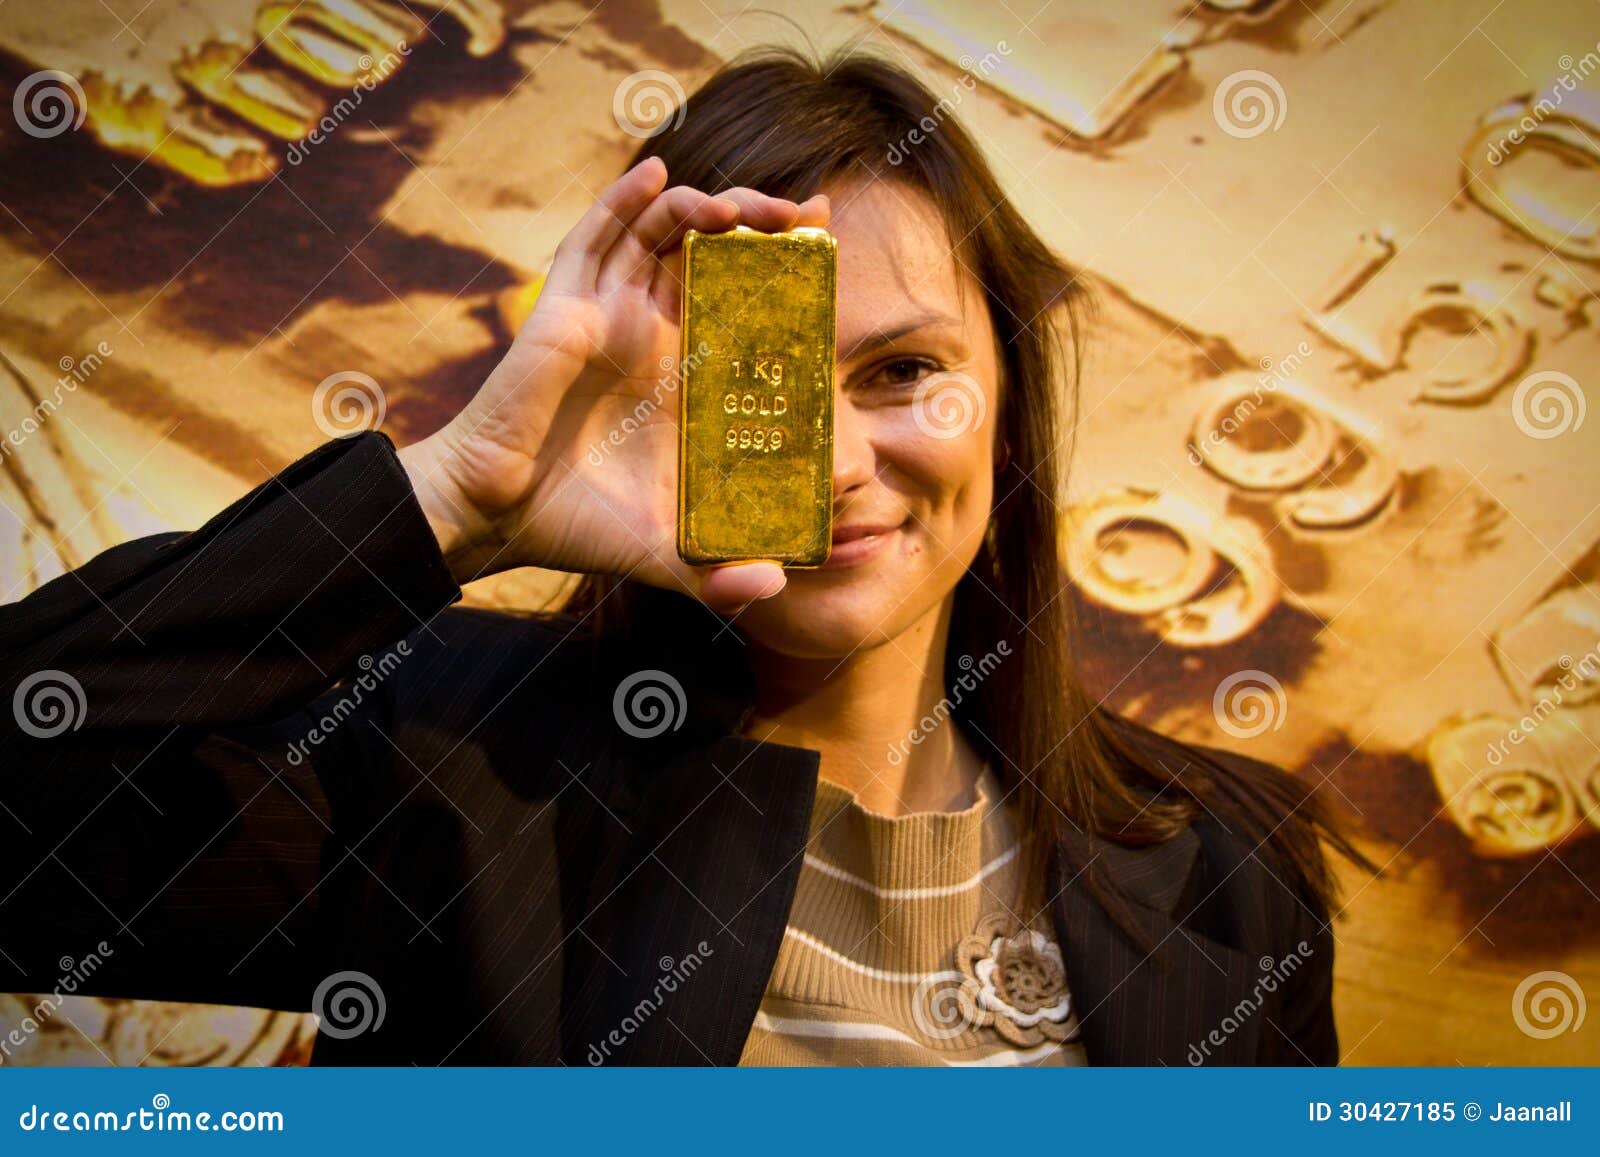 210 Kilo Gold Bar Stock Photos, Images & Pictures